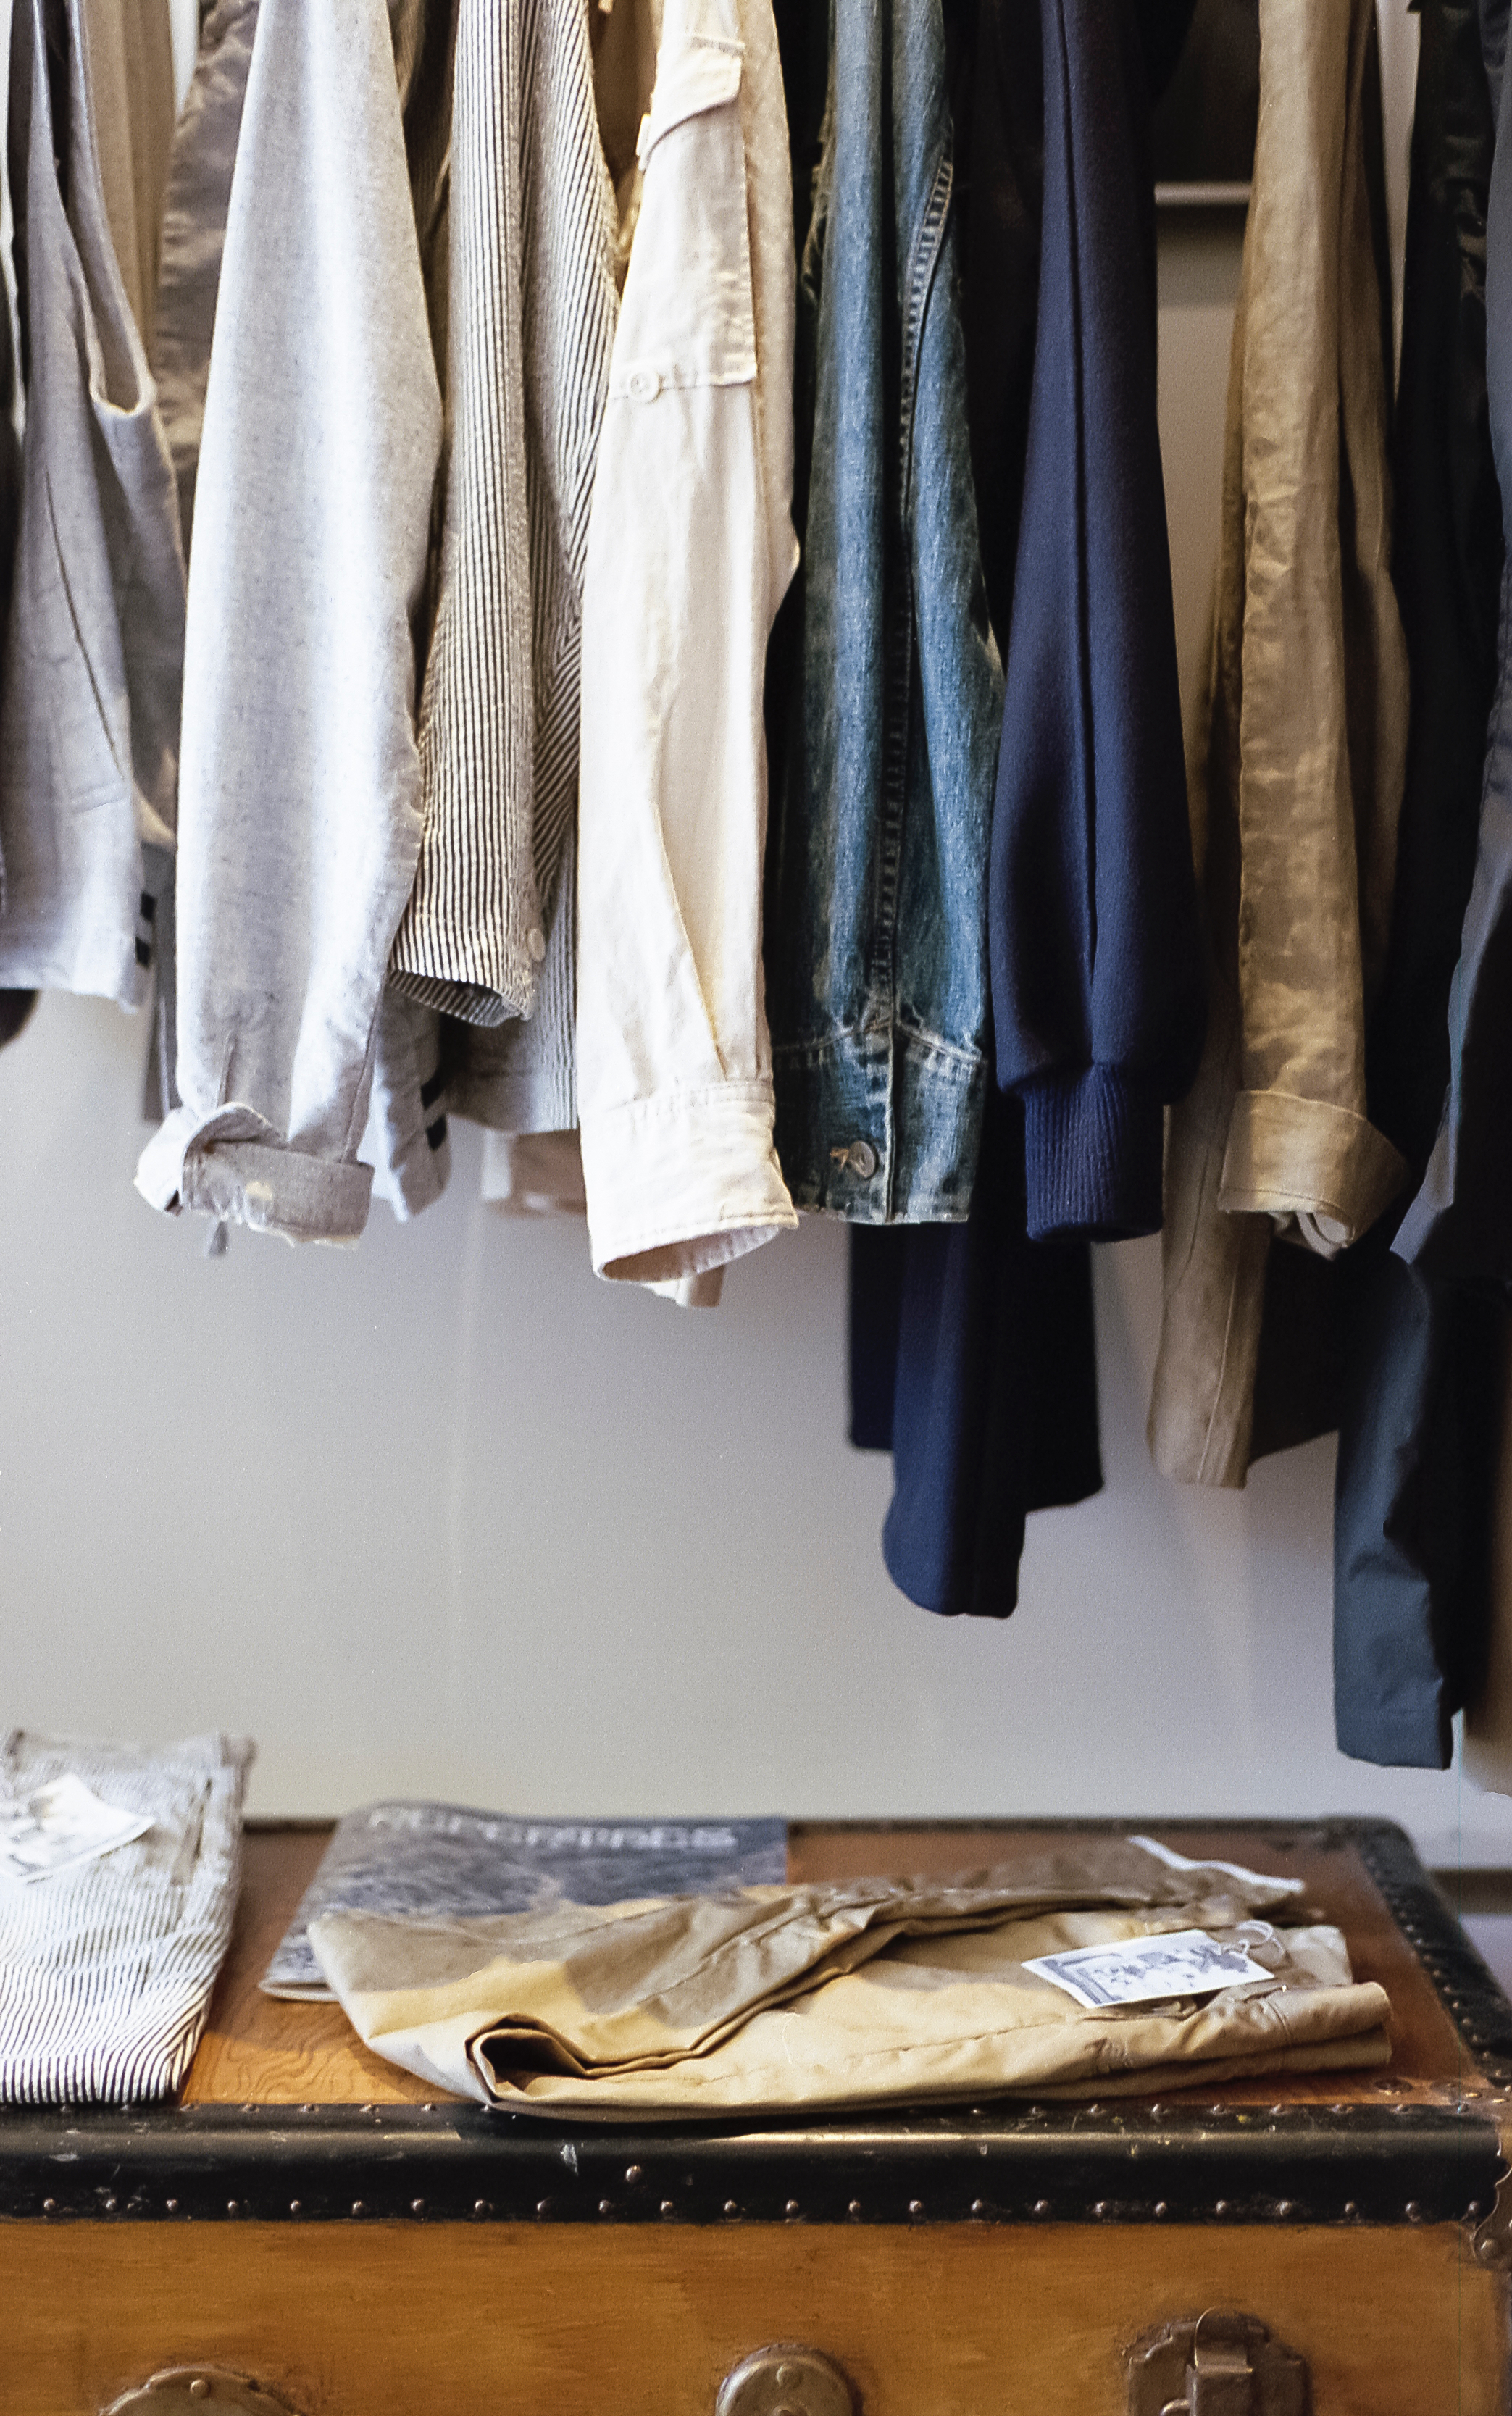 How to Sell or Donate Used Clothing // 24 Carrot Life #sustainablefashion #nowaste